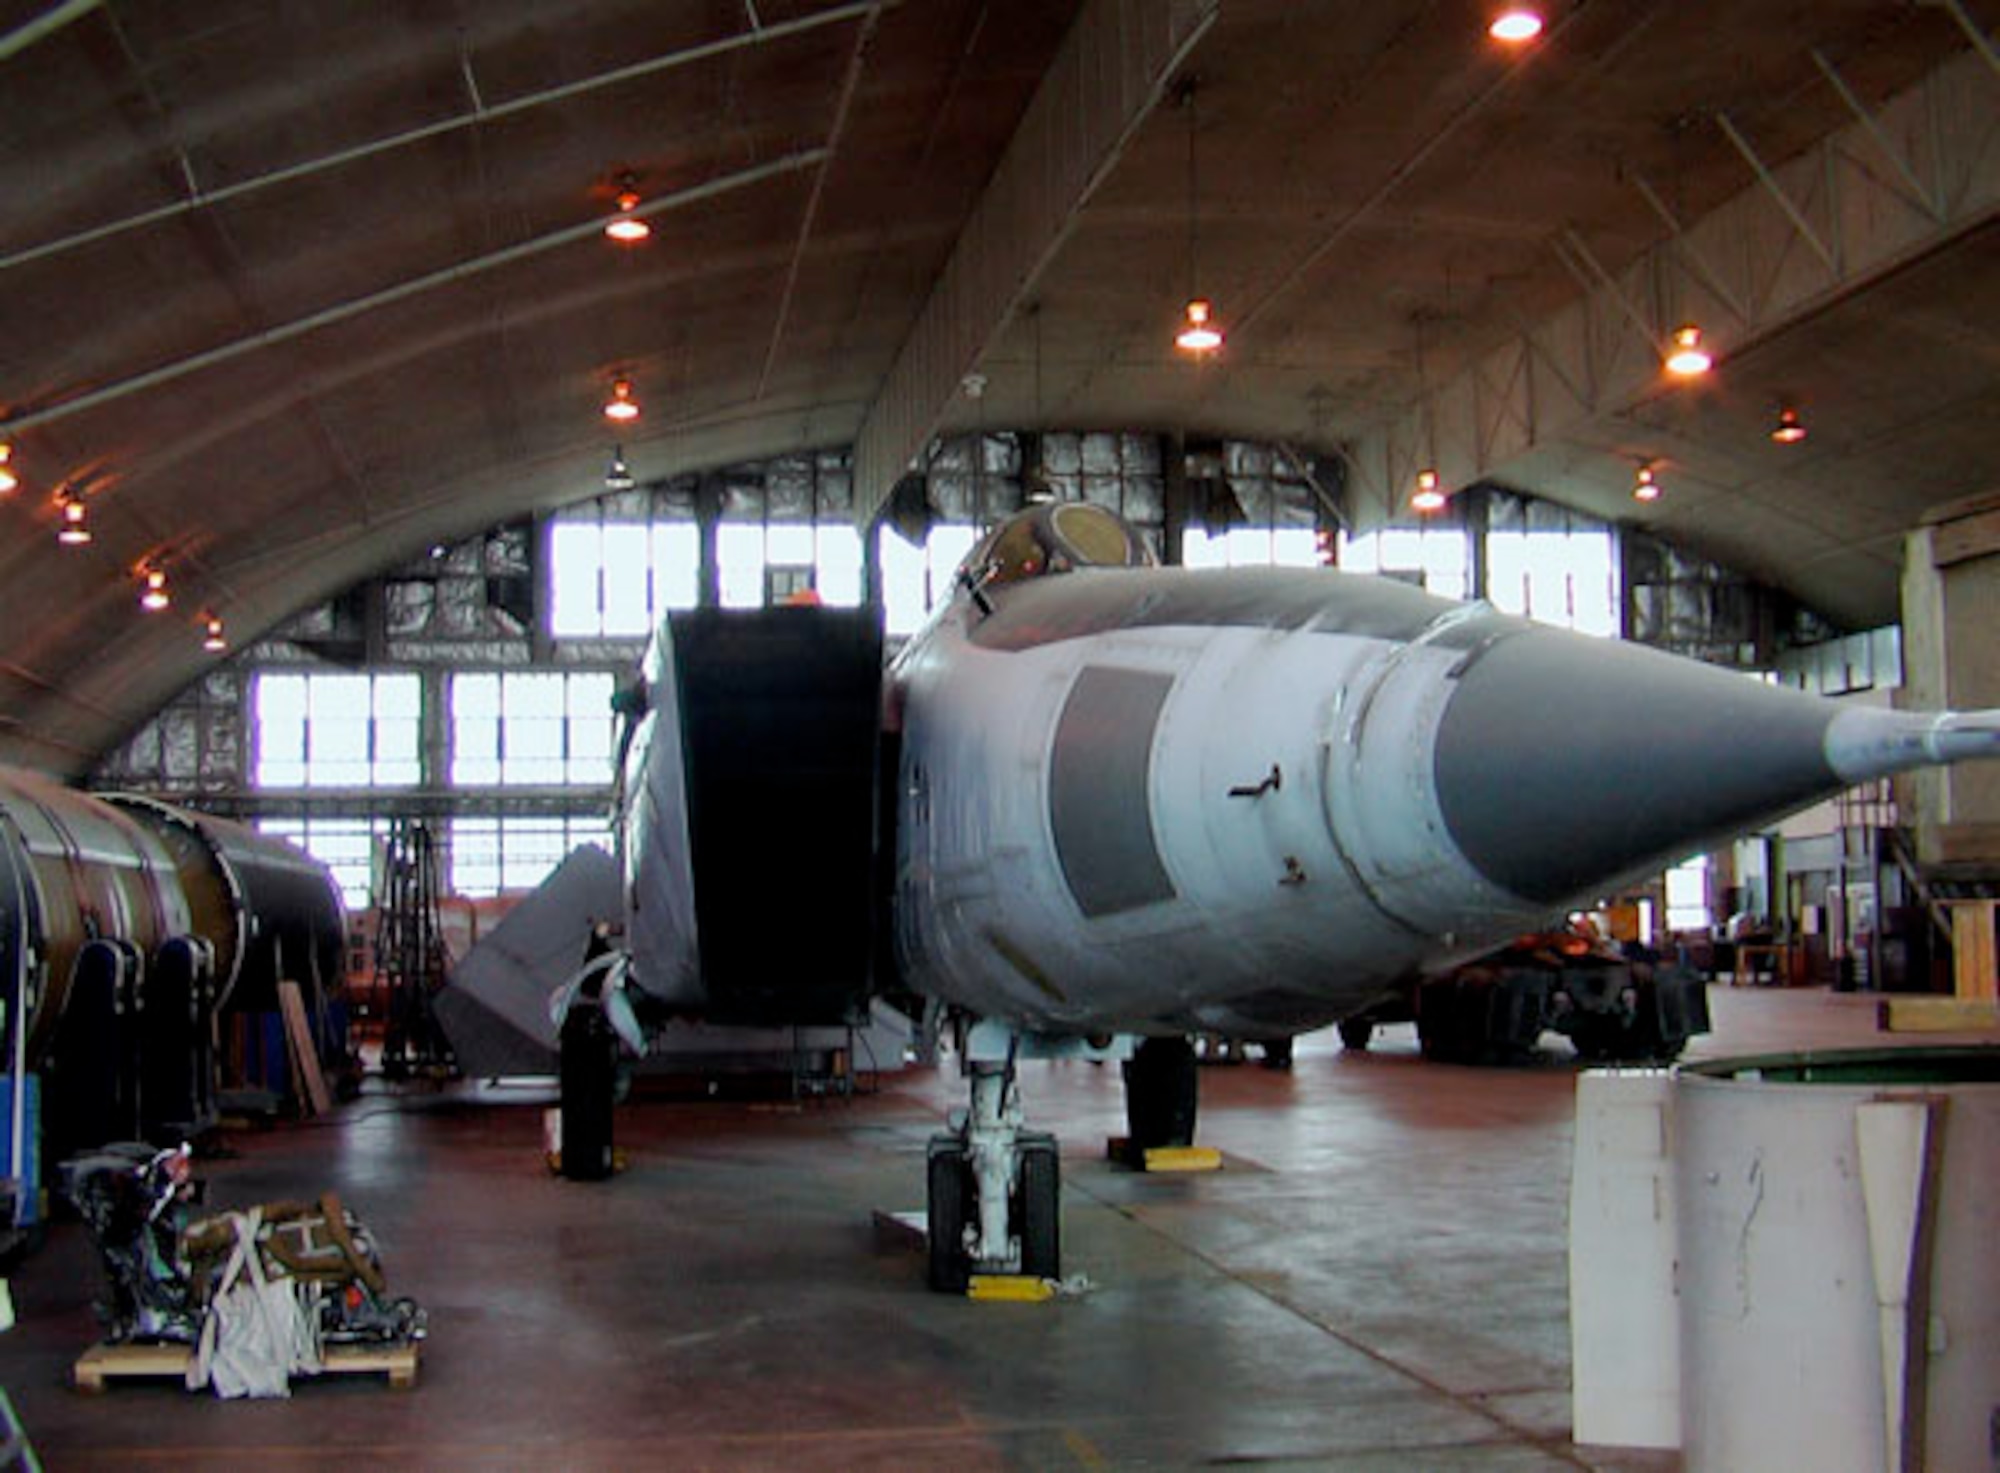 DAYTON, Ohio (11/2006) -- MiG-25 in the restoration area at the National Museum of the U.S. Air Force. (Photo by Timothy R. Gaffney)